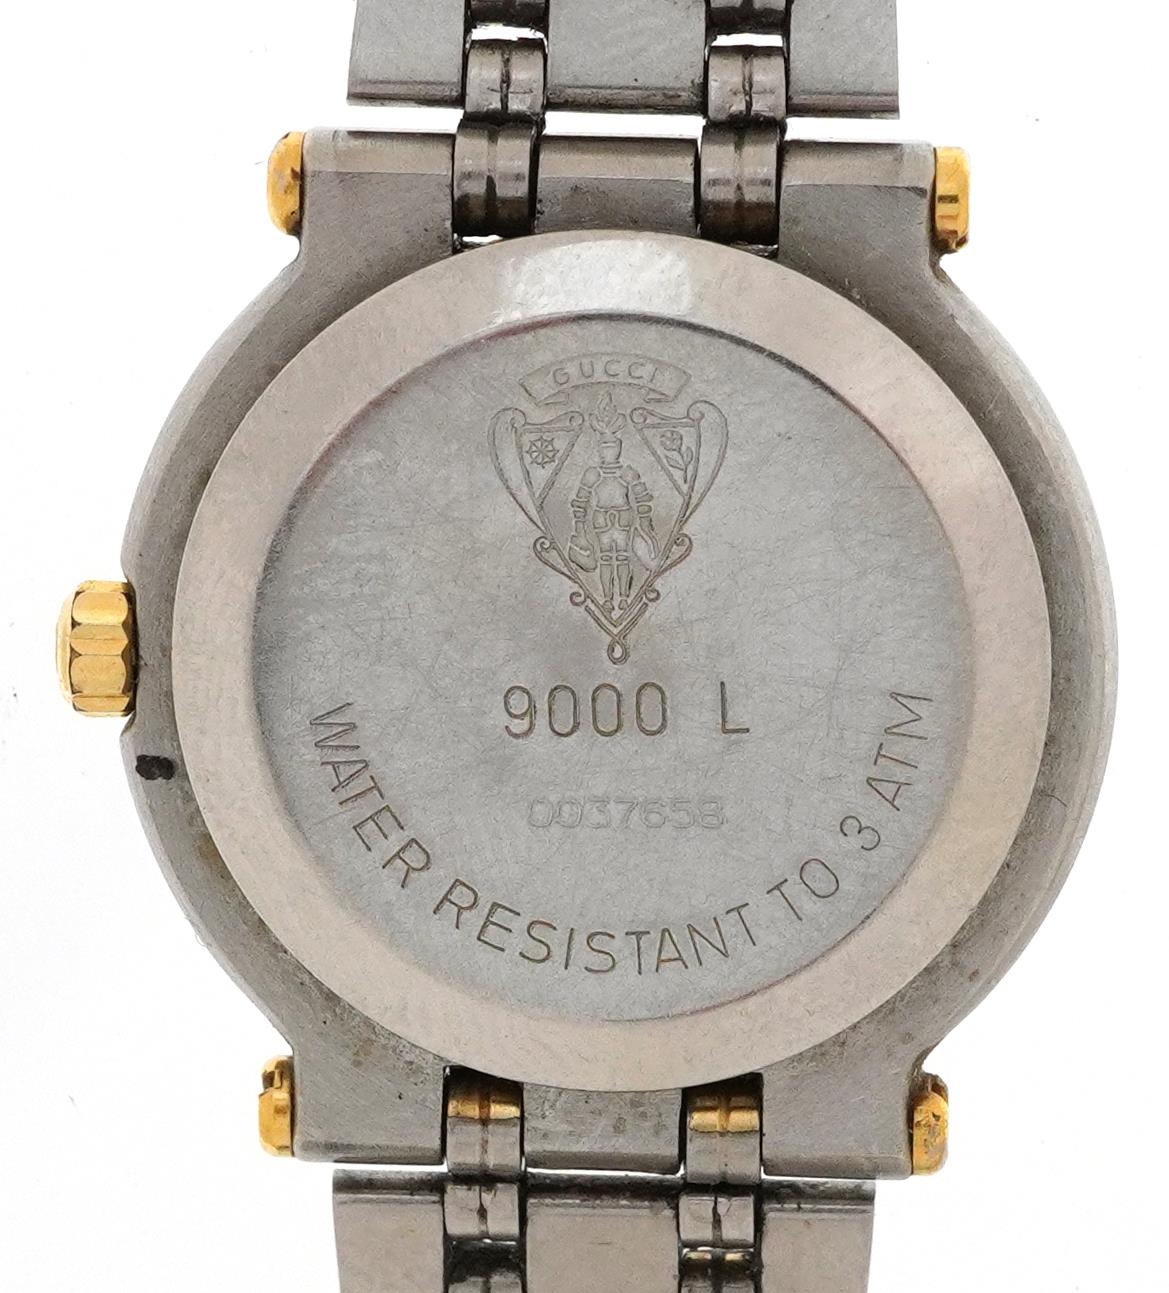 Gucci, ladies Gucci stainless steel 9000L quartz wristwatch with date aperture, serial number - Image 4 of 7